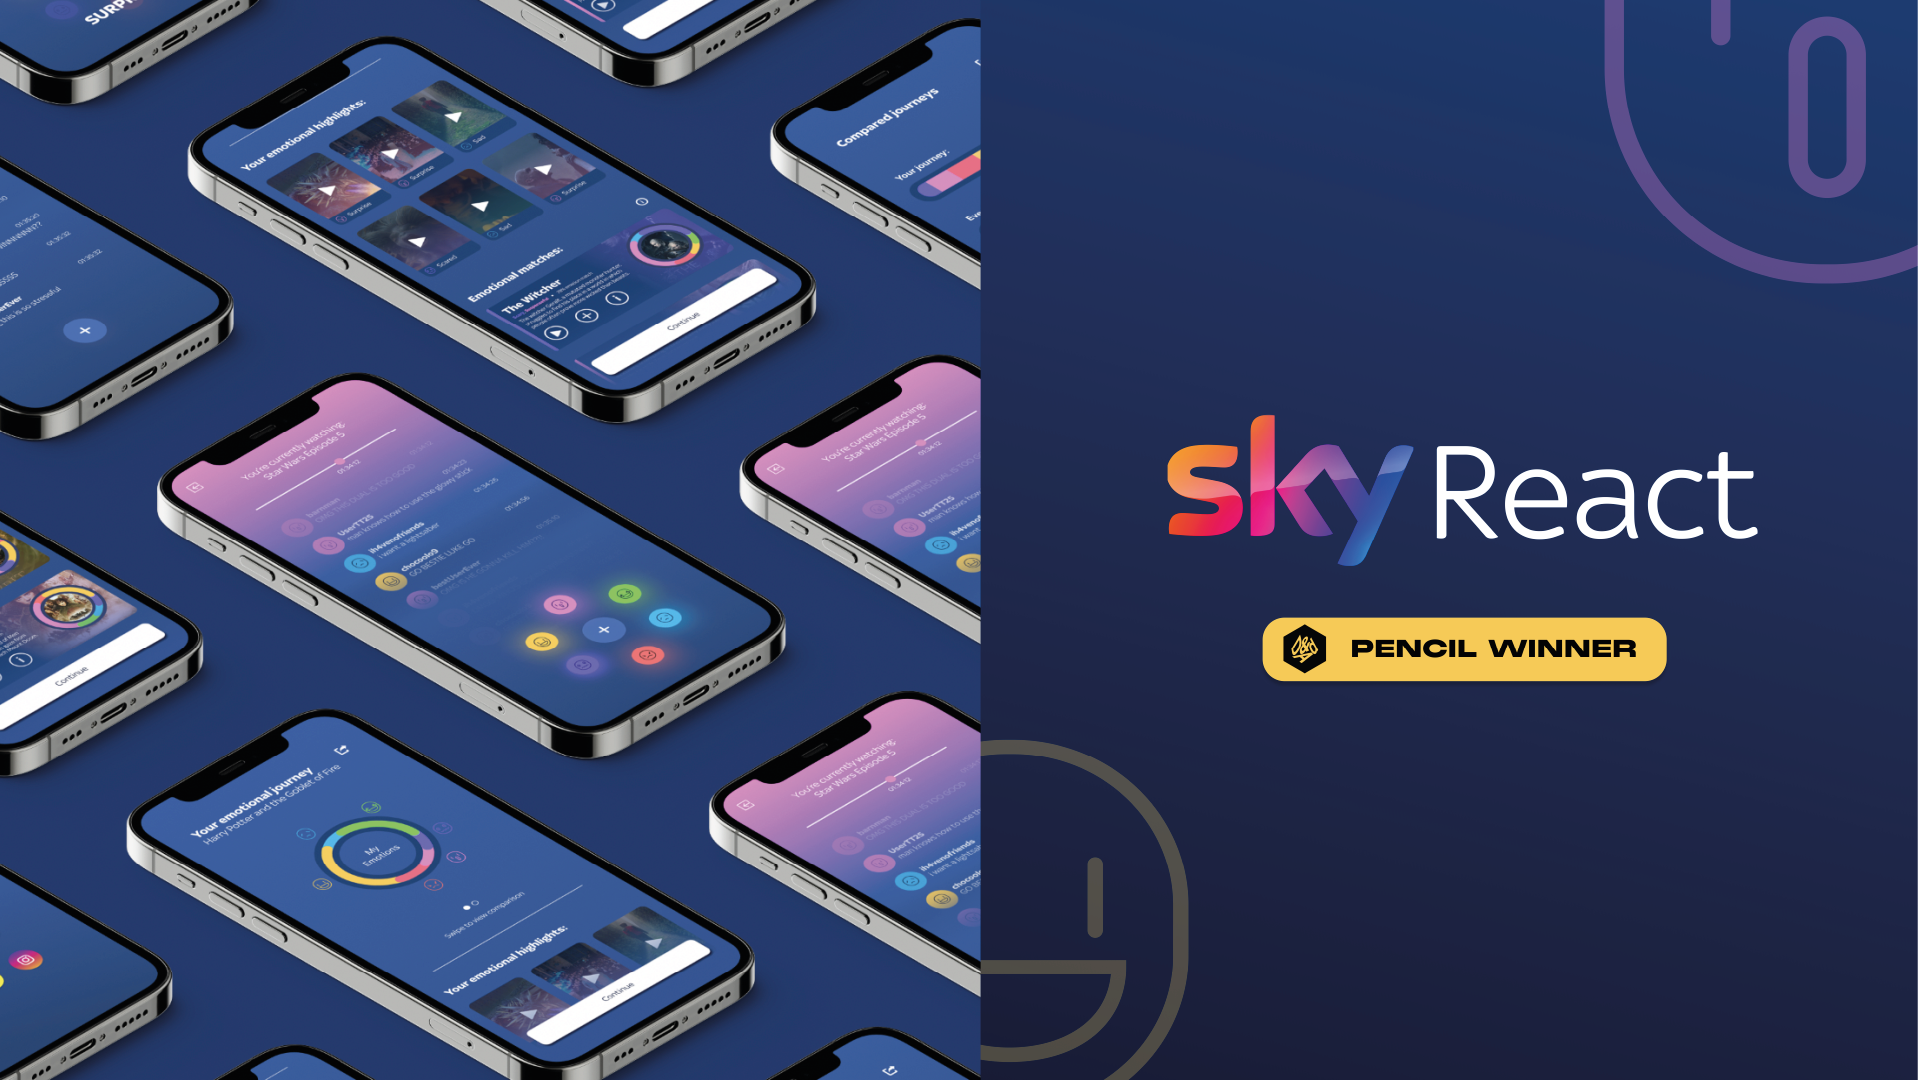 Sky react banner with design mocked up onto phones on the left and logo on the right.